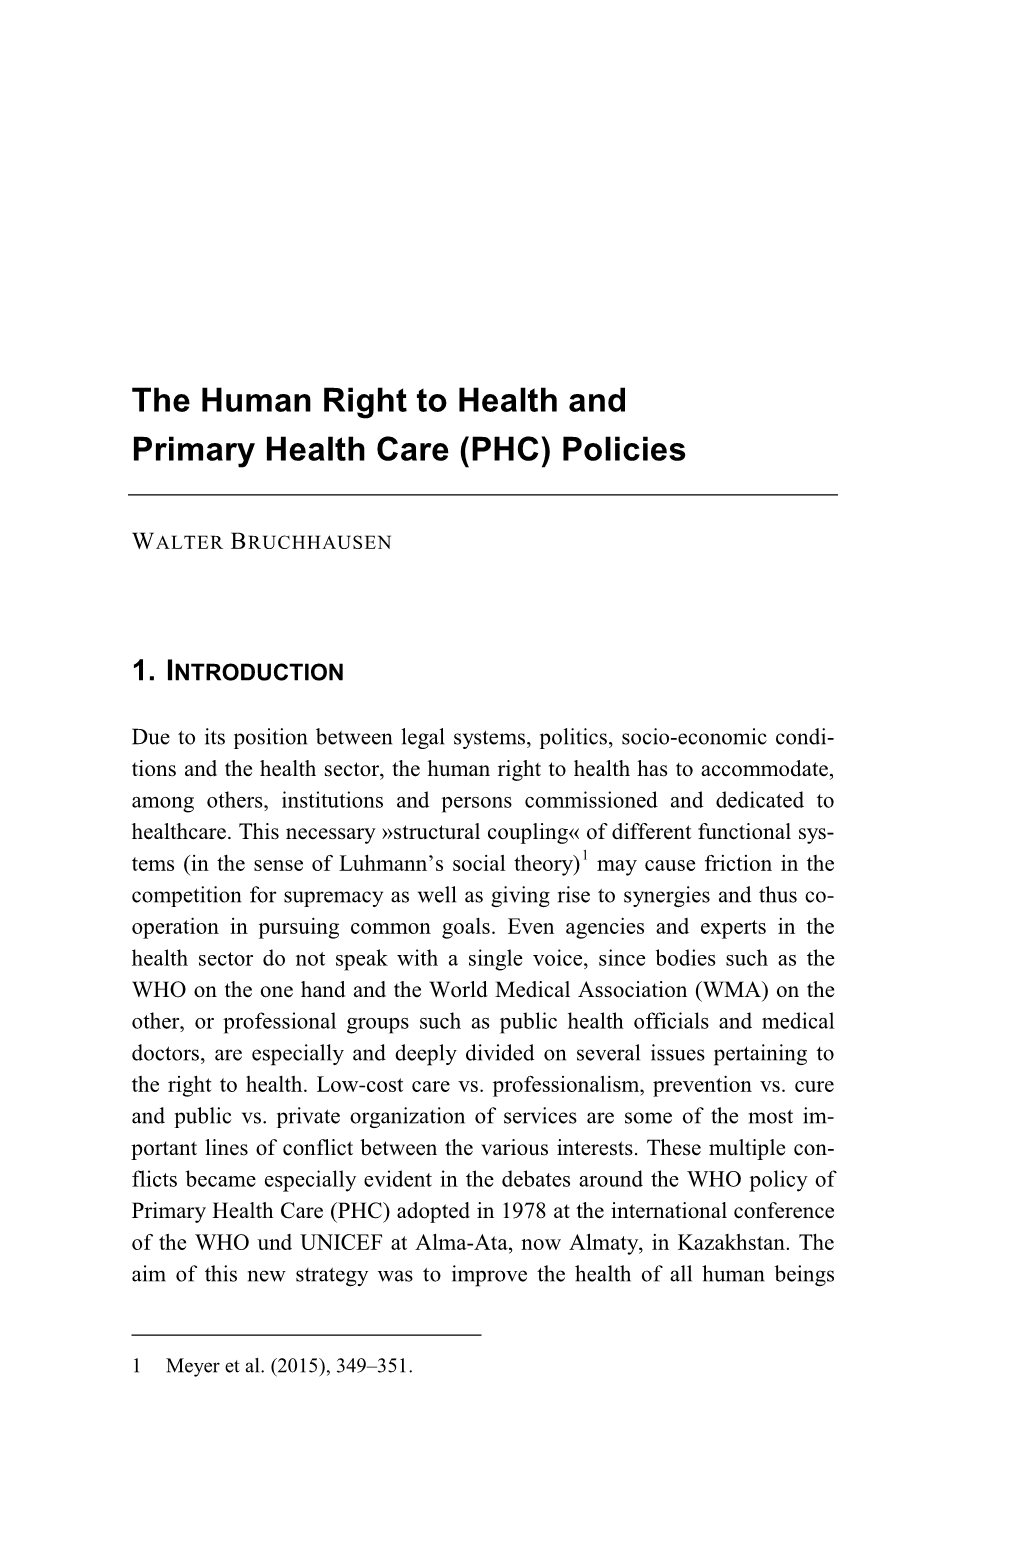 The Human Right to Health and Primary Health Care (PHC) Policies